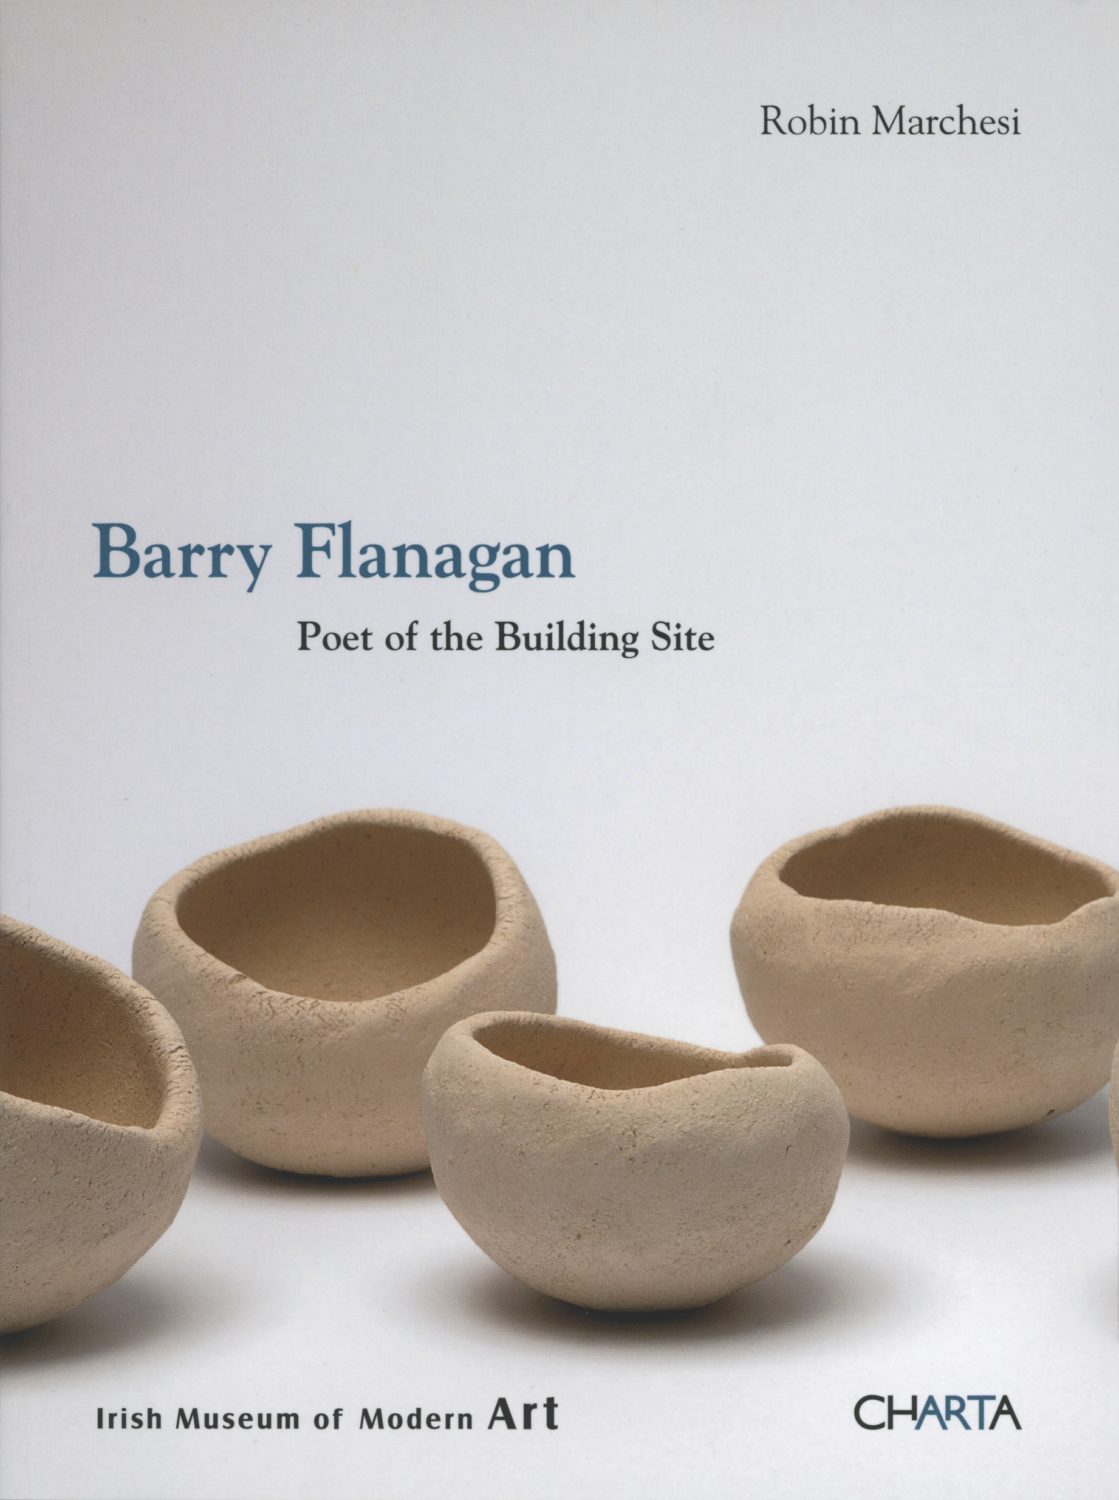 Barry-Flanagan-Poet-of-the-Building-Site-IMMA-2011-cover-cropped